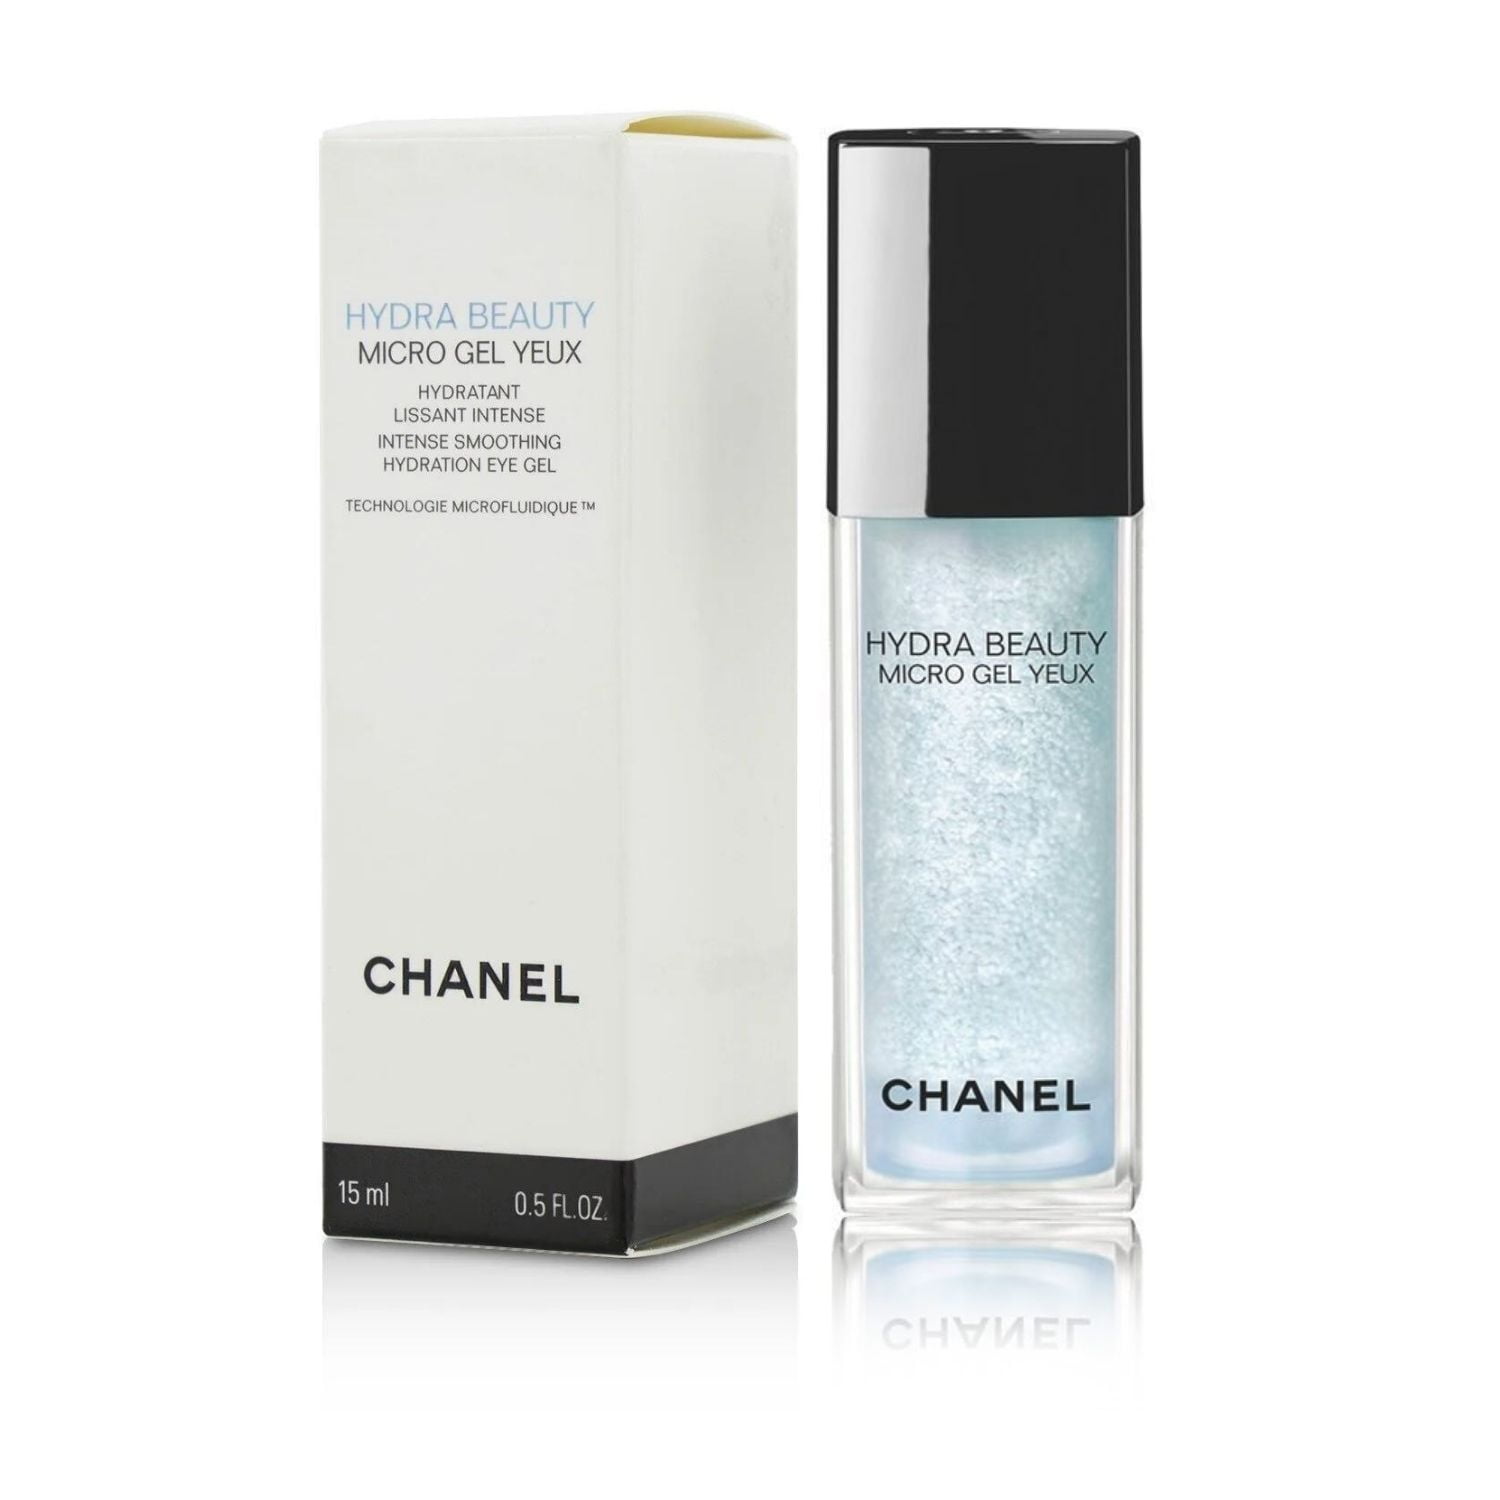 Chanel Hydra Beauty Micro Gel Yeux - «CHANEL HYDRA BEAUTY GEL YEUX. We  always expect a Wow effect from such respectful and hyped products. But in  reality, things turn out to be